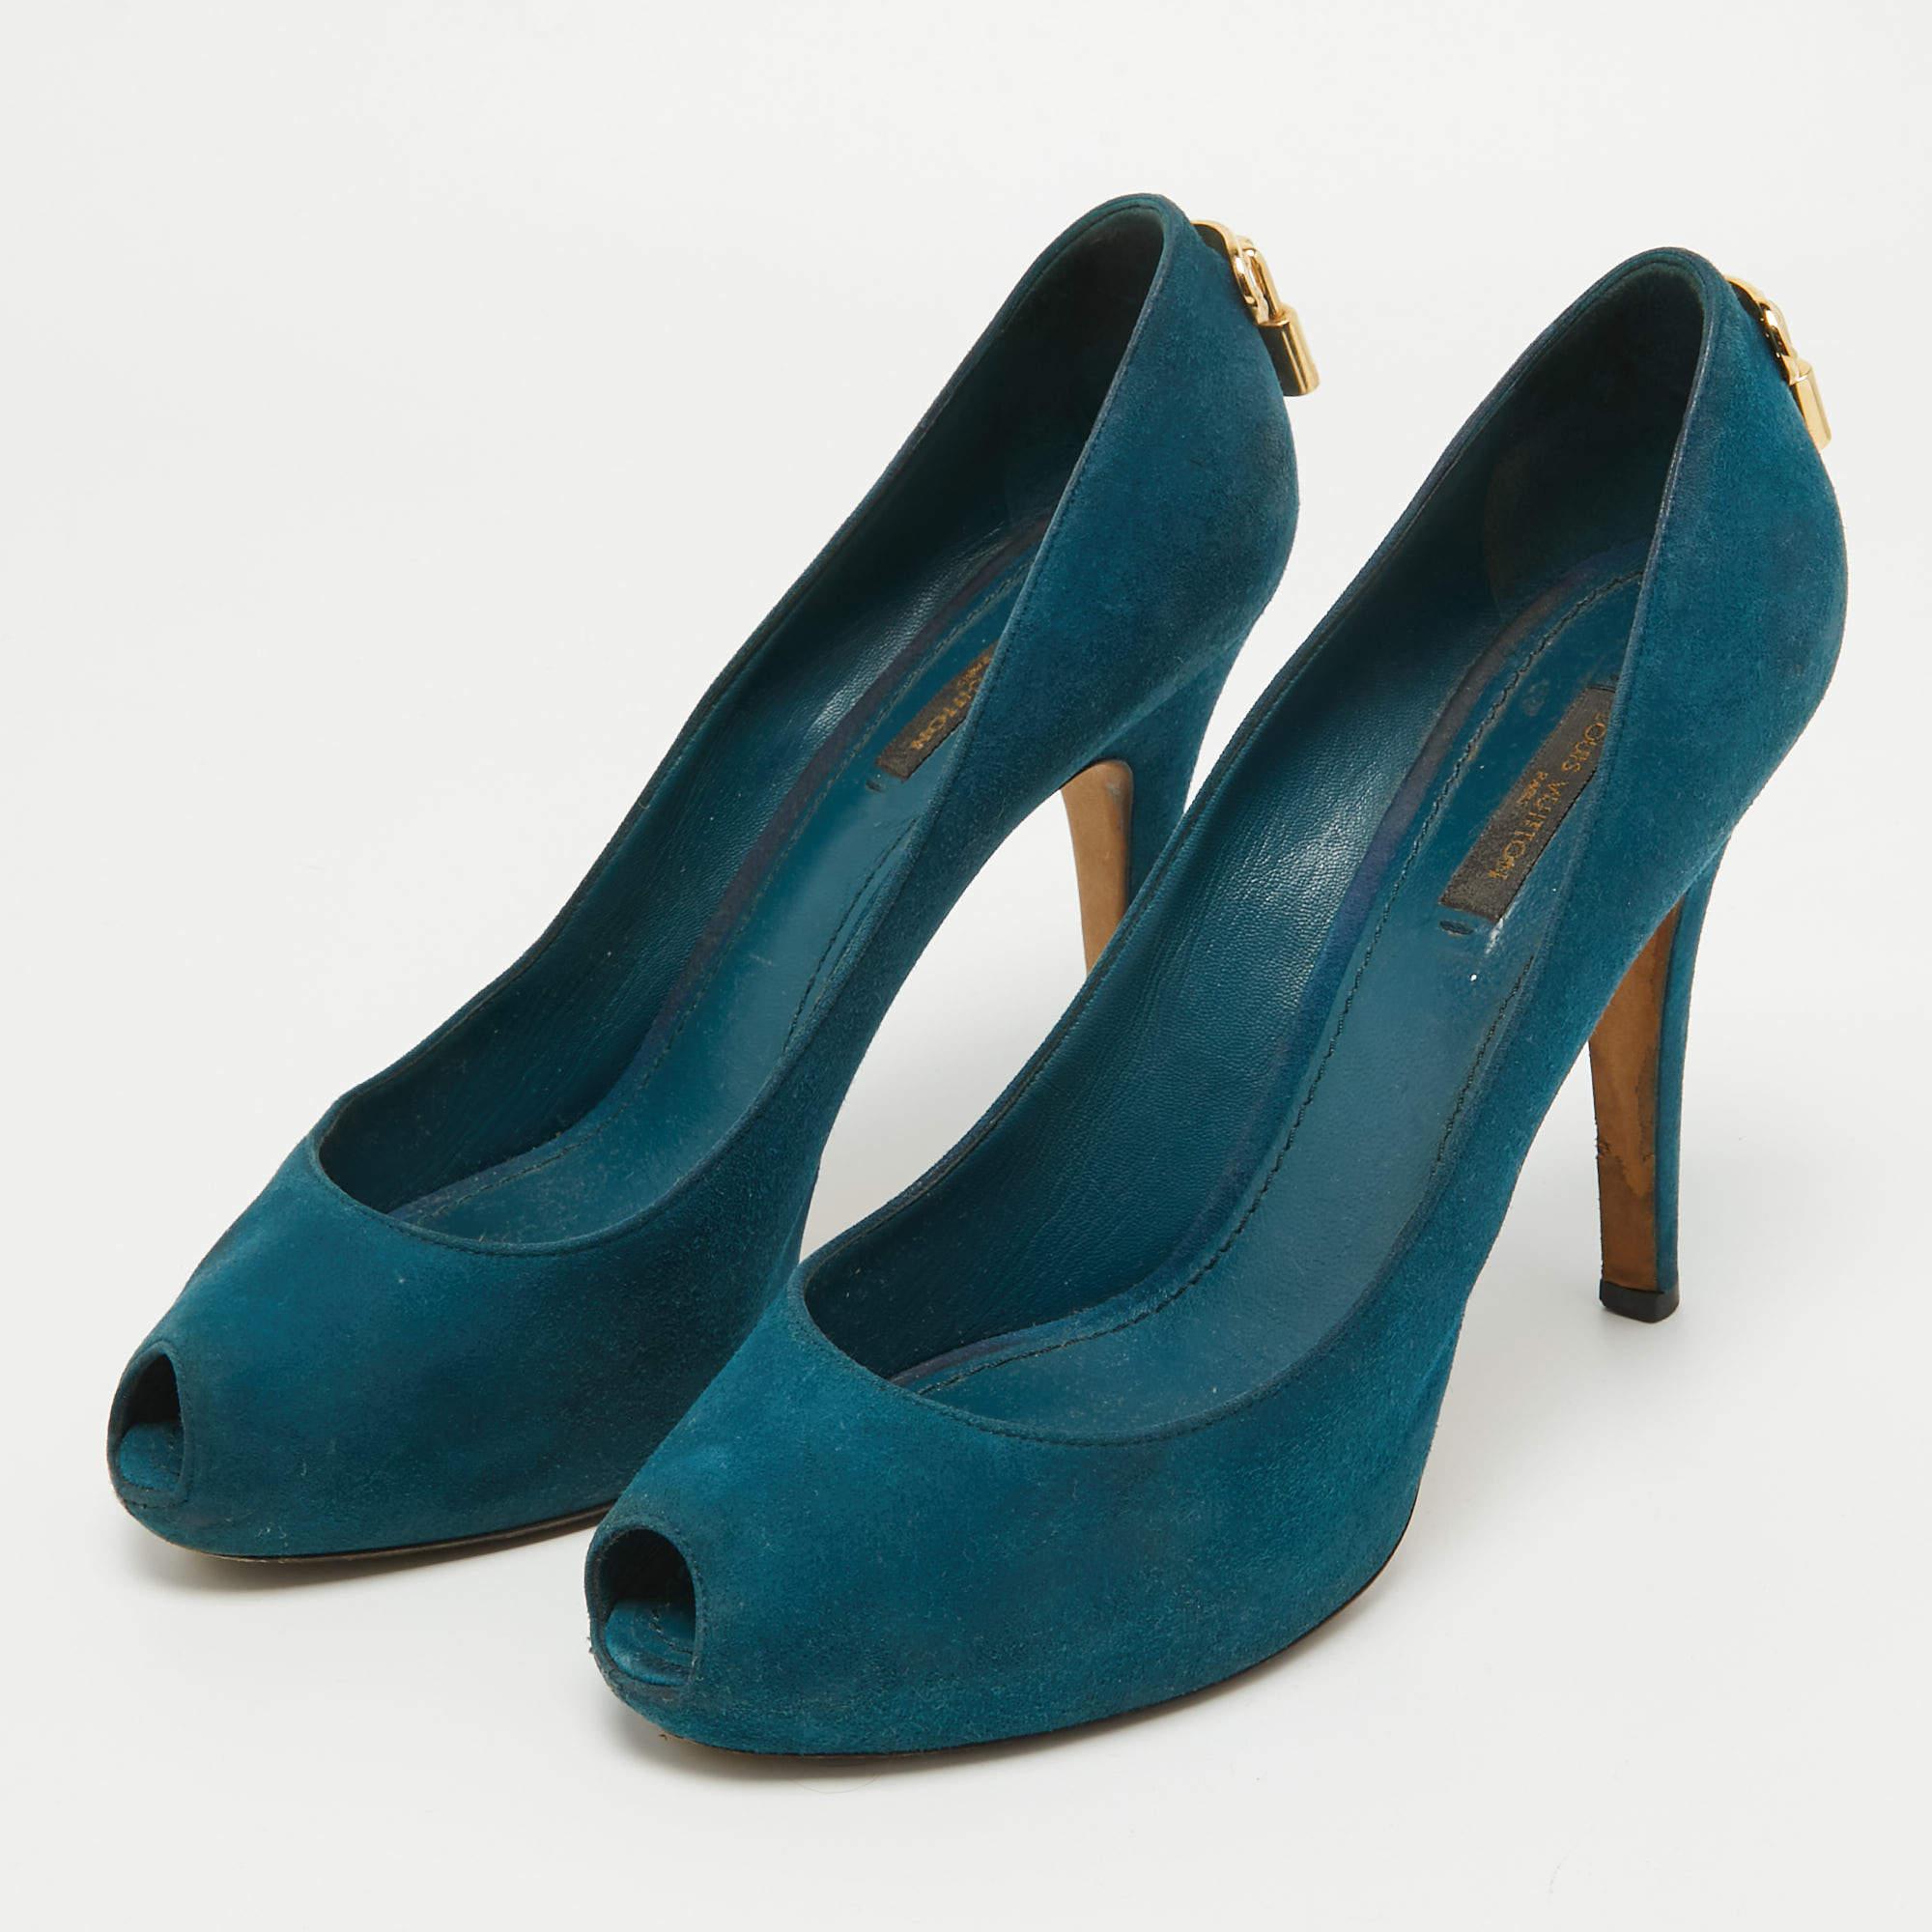 Louis Vuitton Teal Suede Oh Really! Peep Toe Pumps Size 38.5 For Sale 3